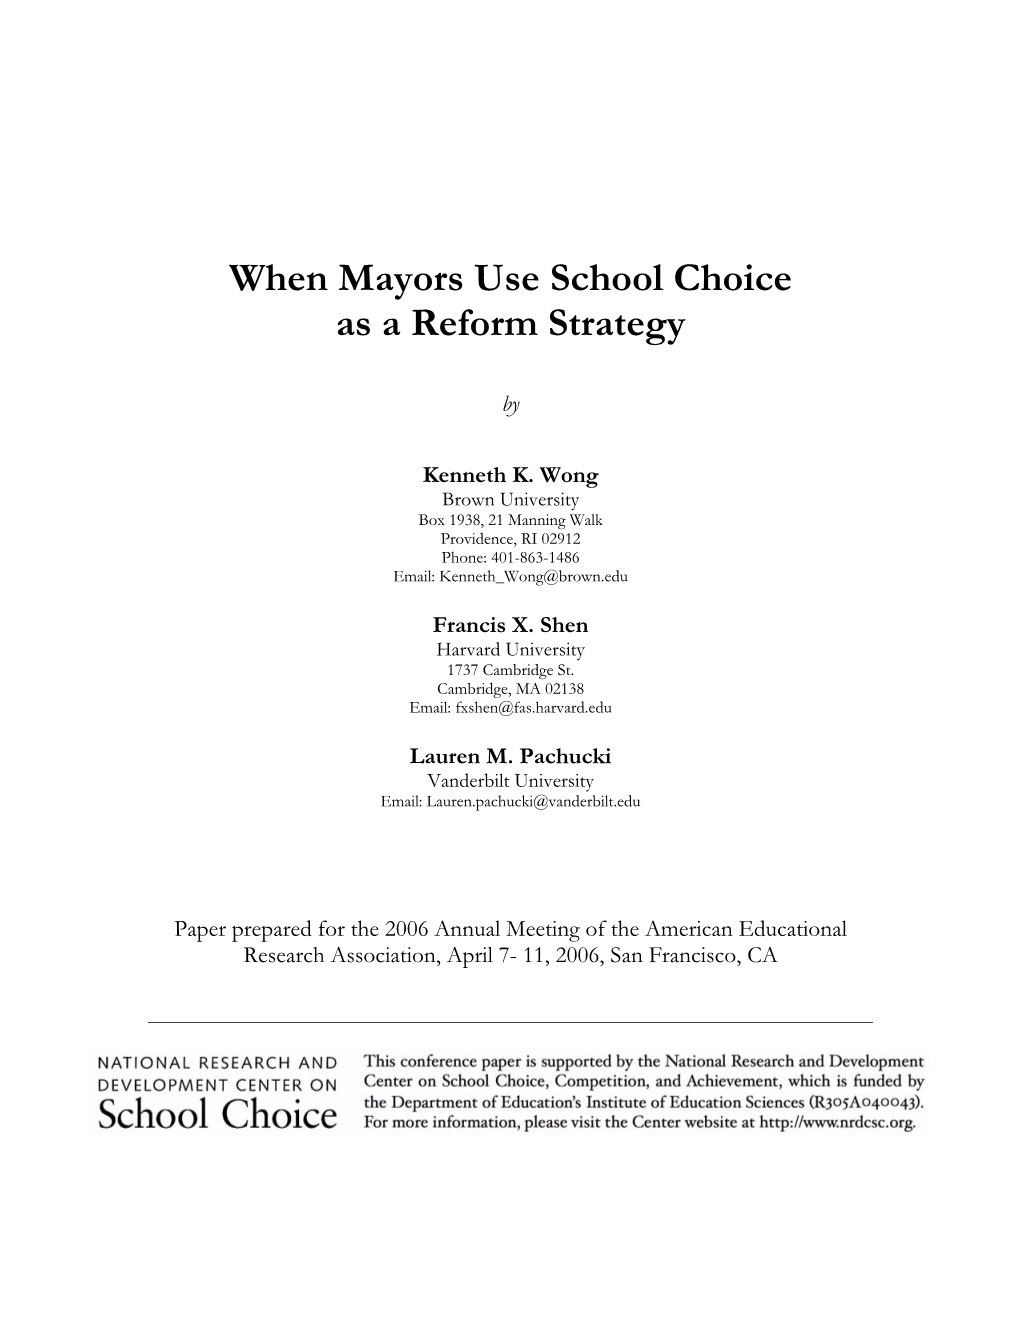 When Mayors Use School Choice As a Reform Strategy